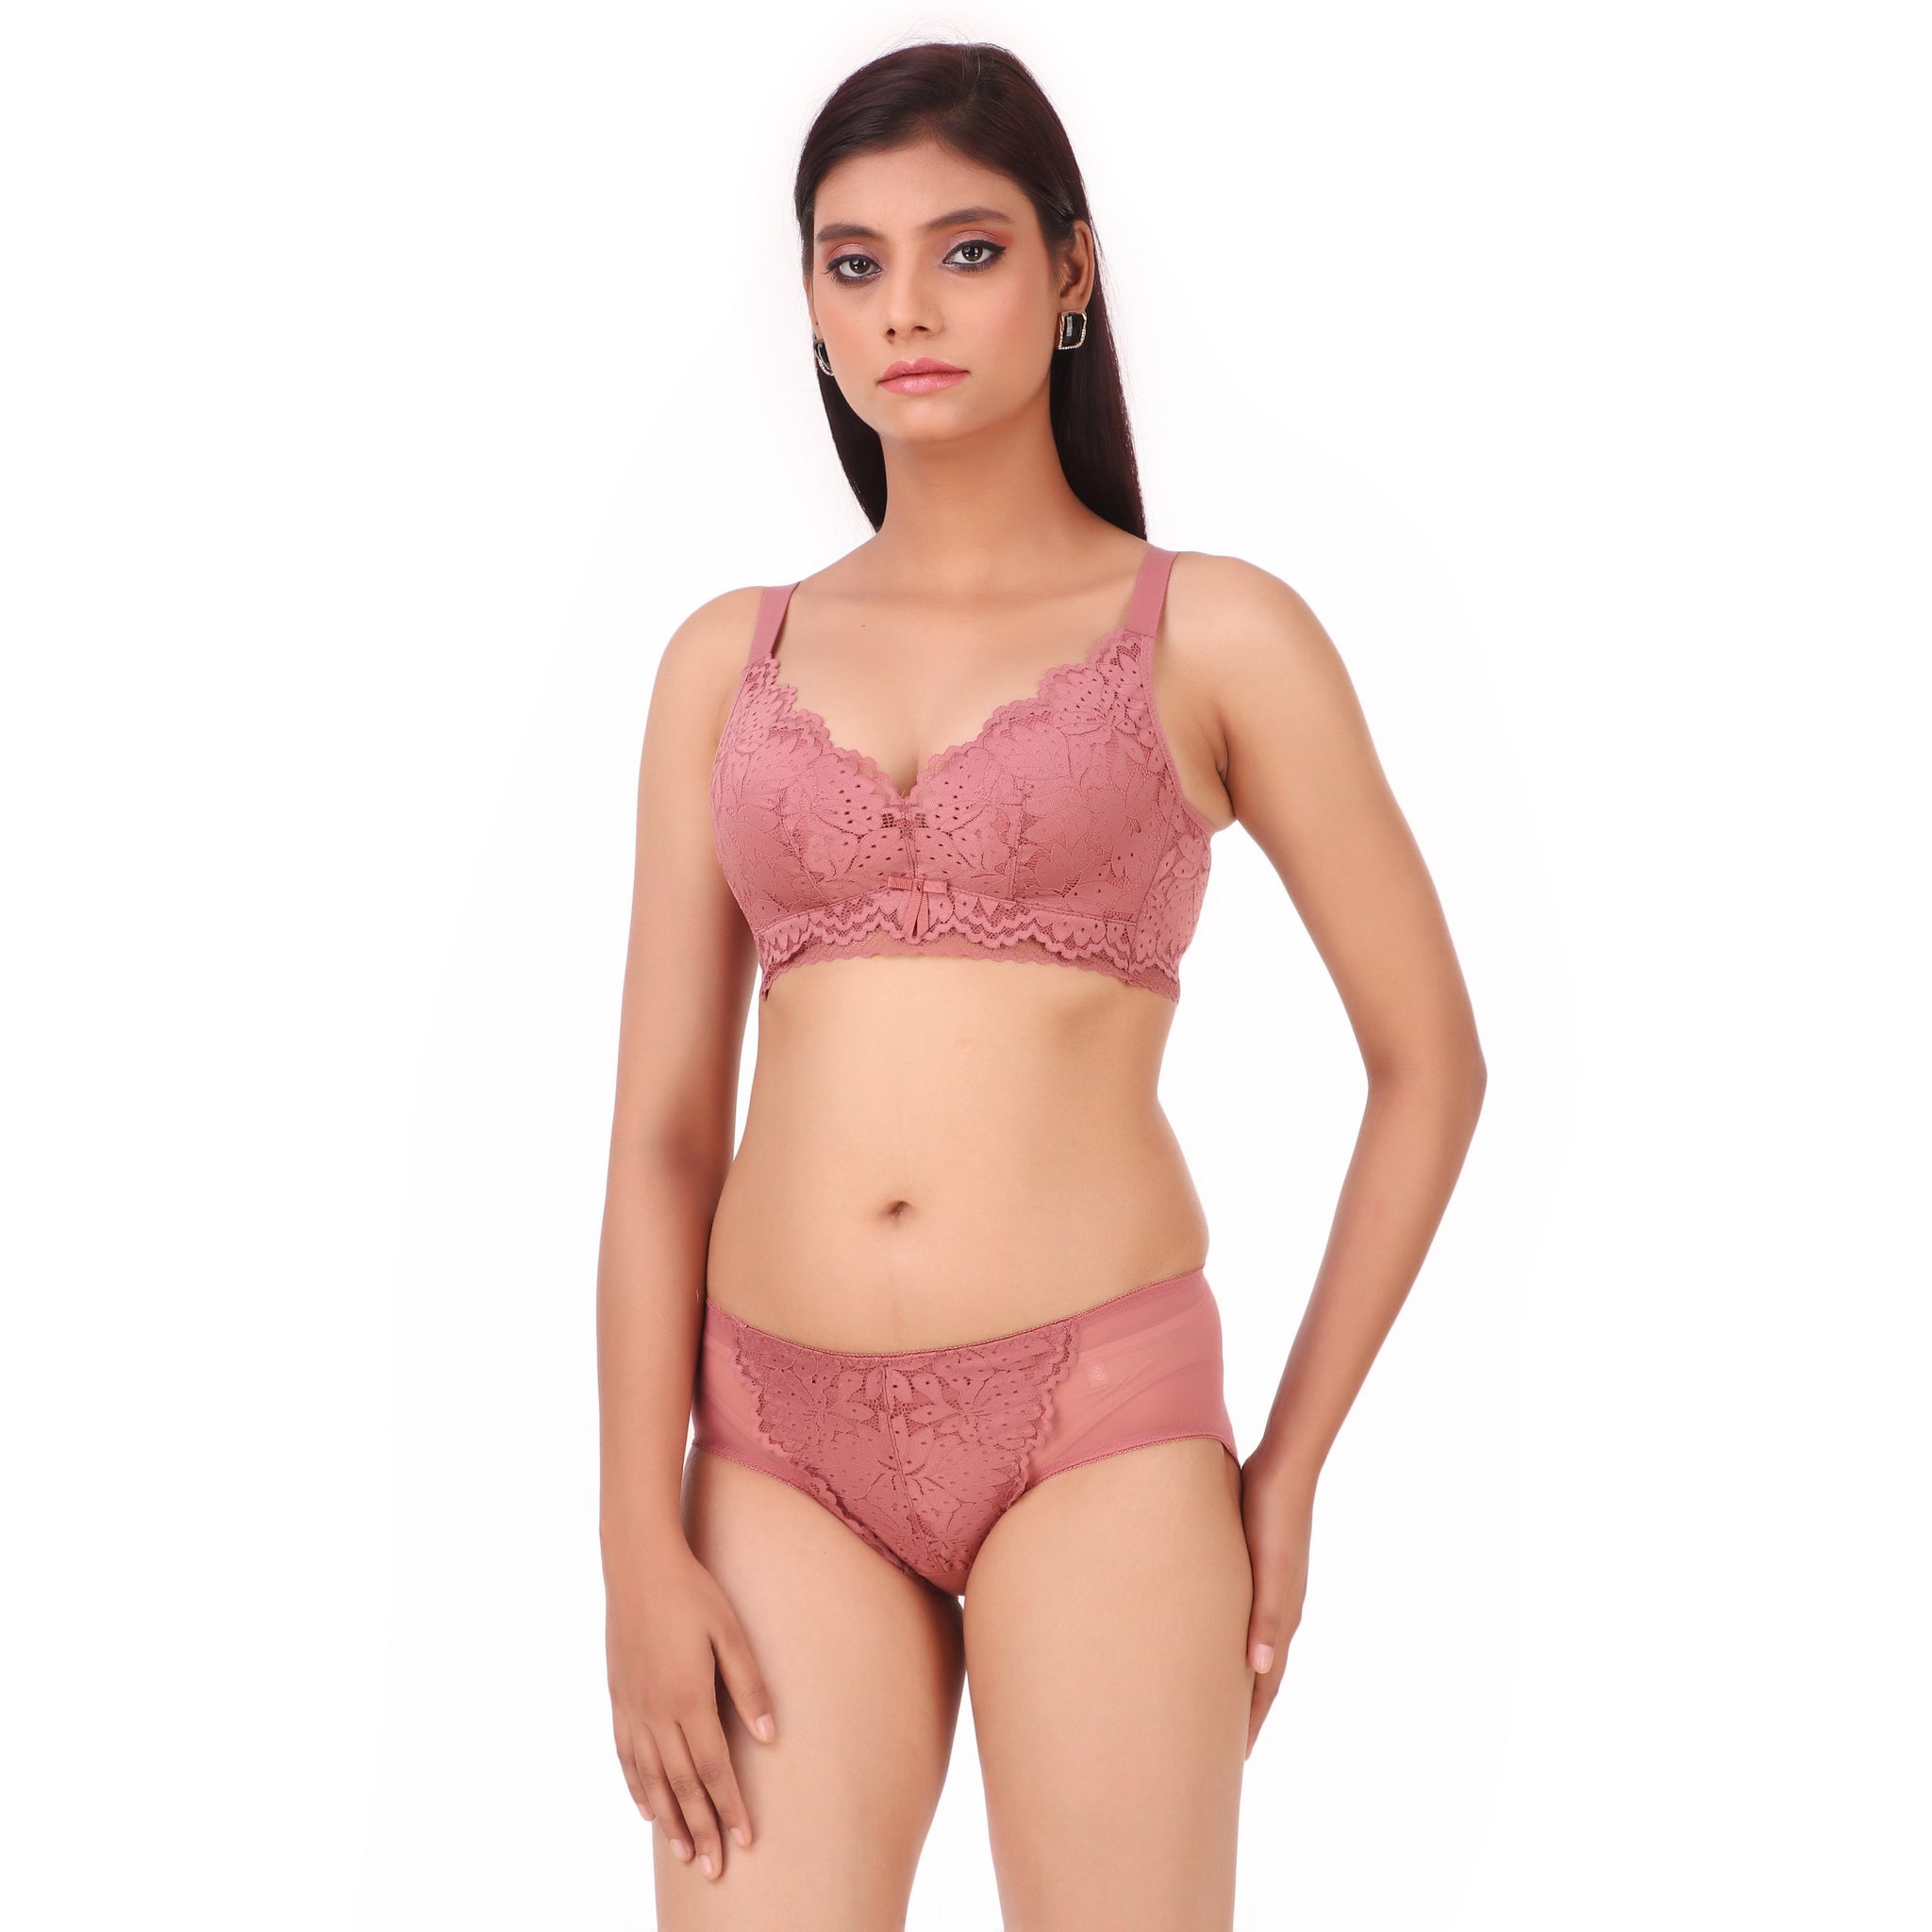 AXTZH-XBRA115 Padded Underwired Full Cup Bra